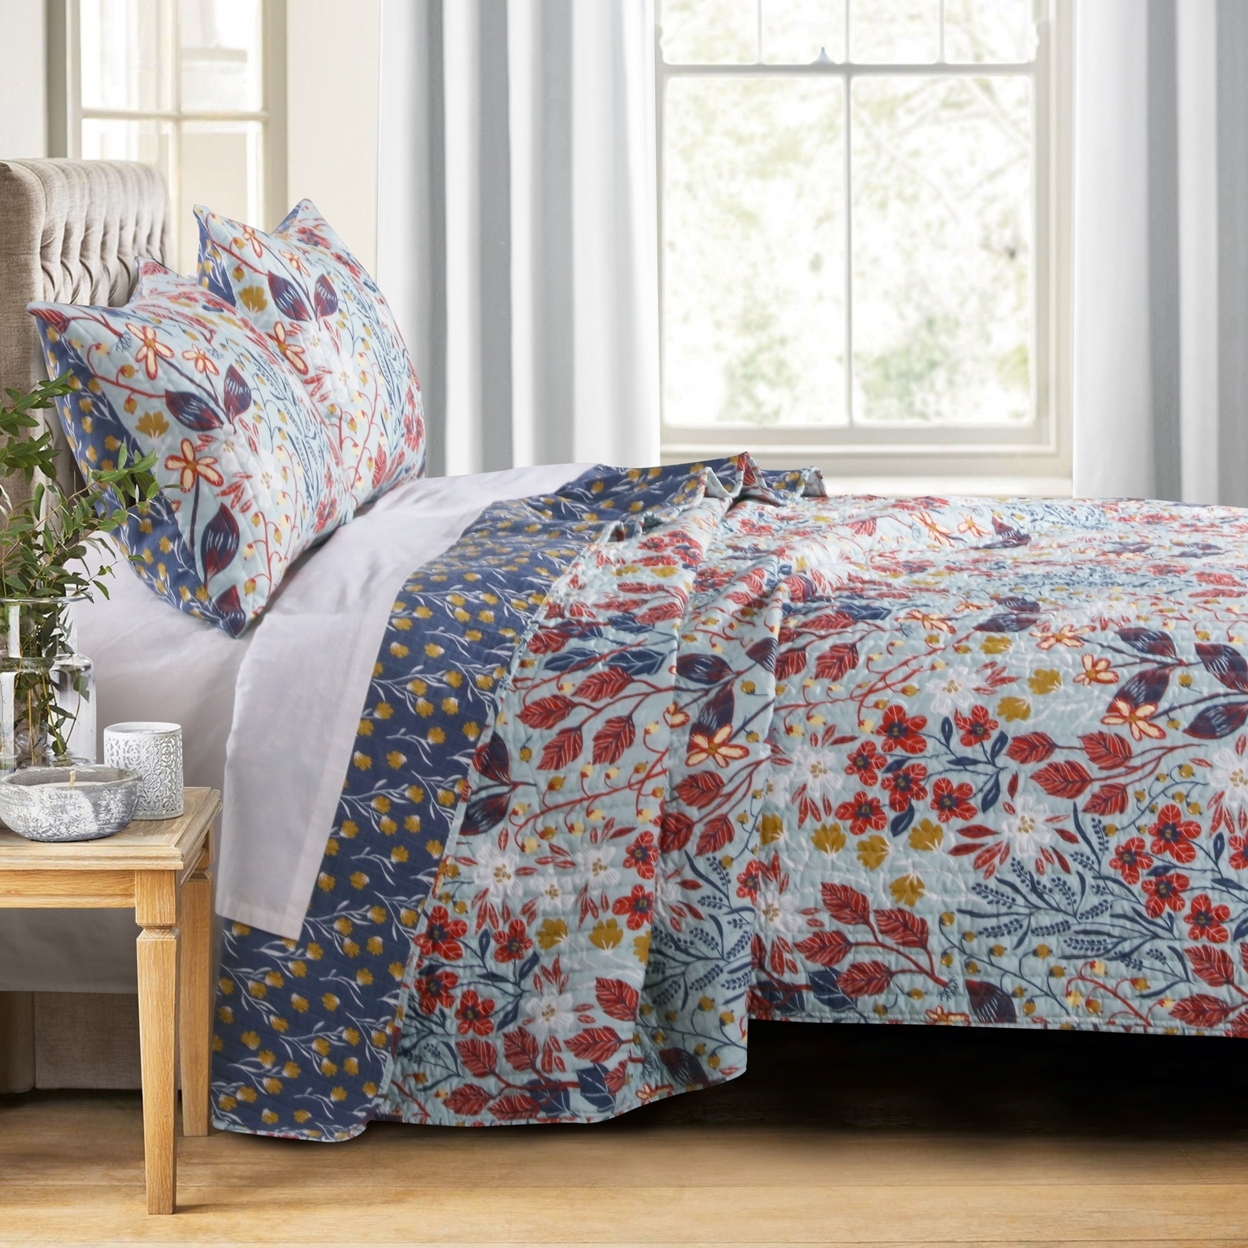 Full Size 3 Piece Polyester Quilt Set With Floral Prints, Multicolor- Saltoro Sherpi